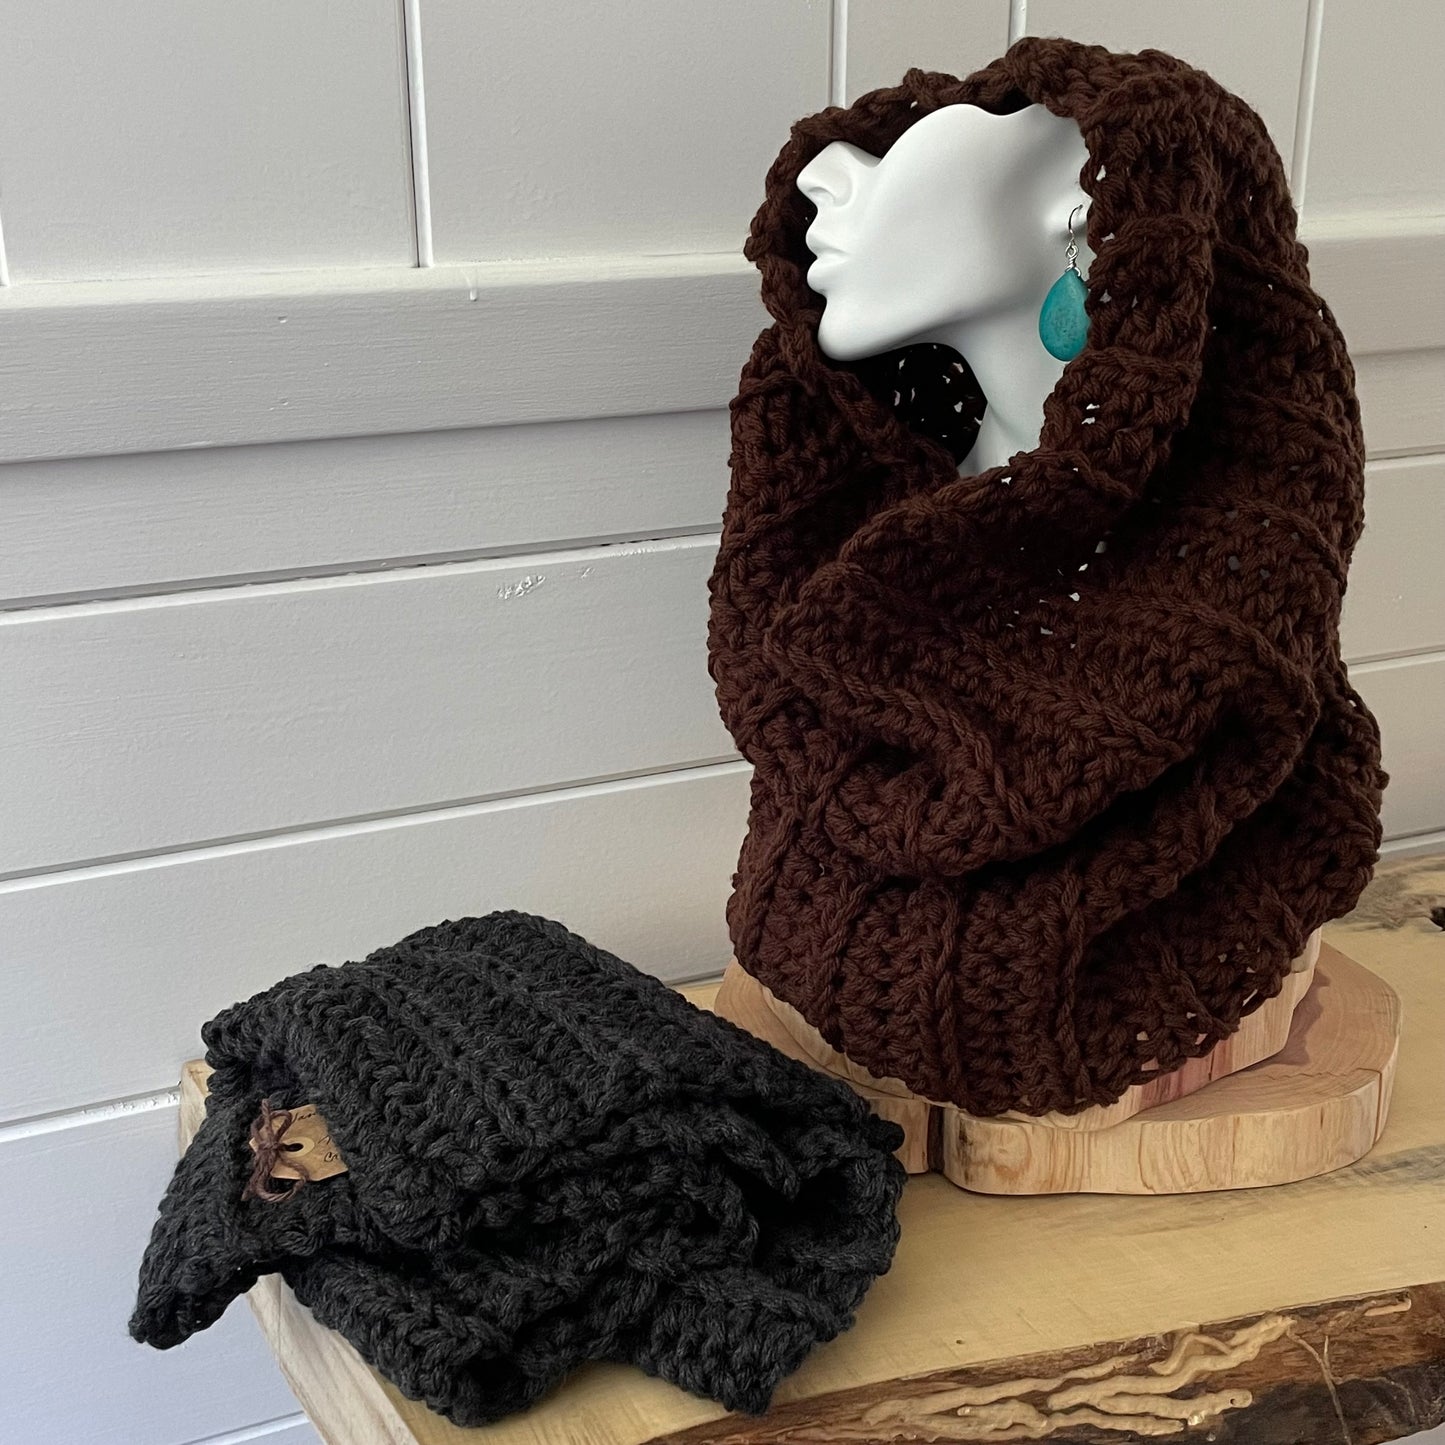 brown scarf displayed next to charcoal scarf for comparison